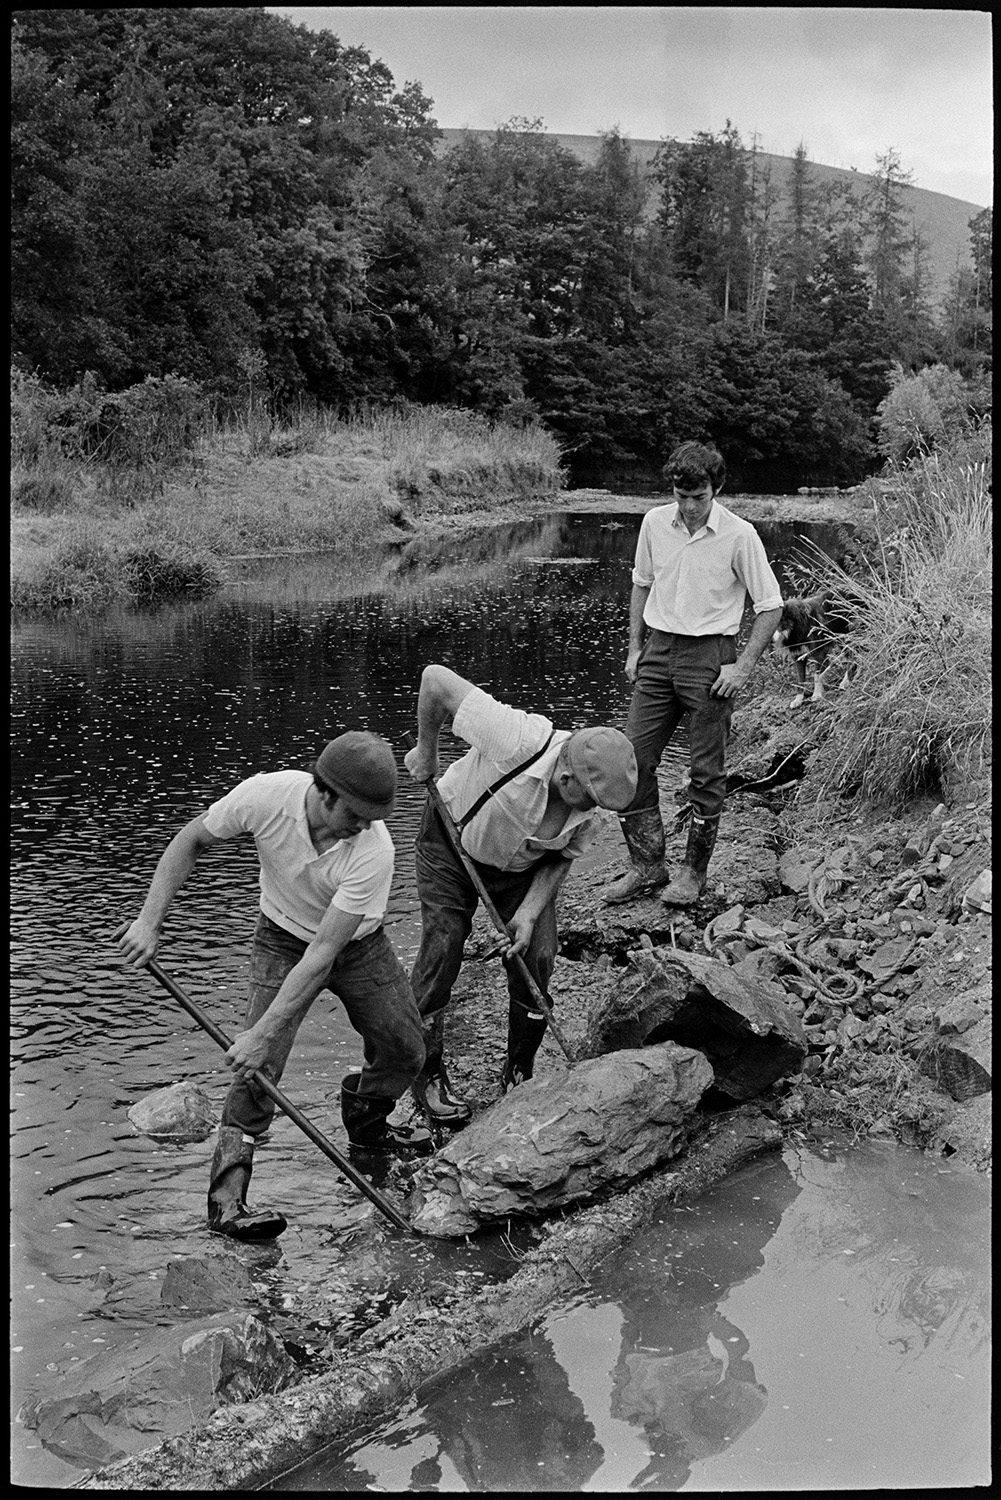 Farmers putting boulders to protect river bank. 
[John Ward and his two sons, Graham Ward and David Ward, moving boulders against a river bank with crow bars, to protect the bank from erosion, at Parsonage, Iddesleigh.]